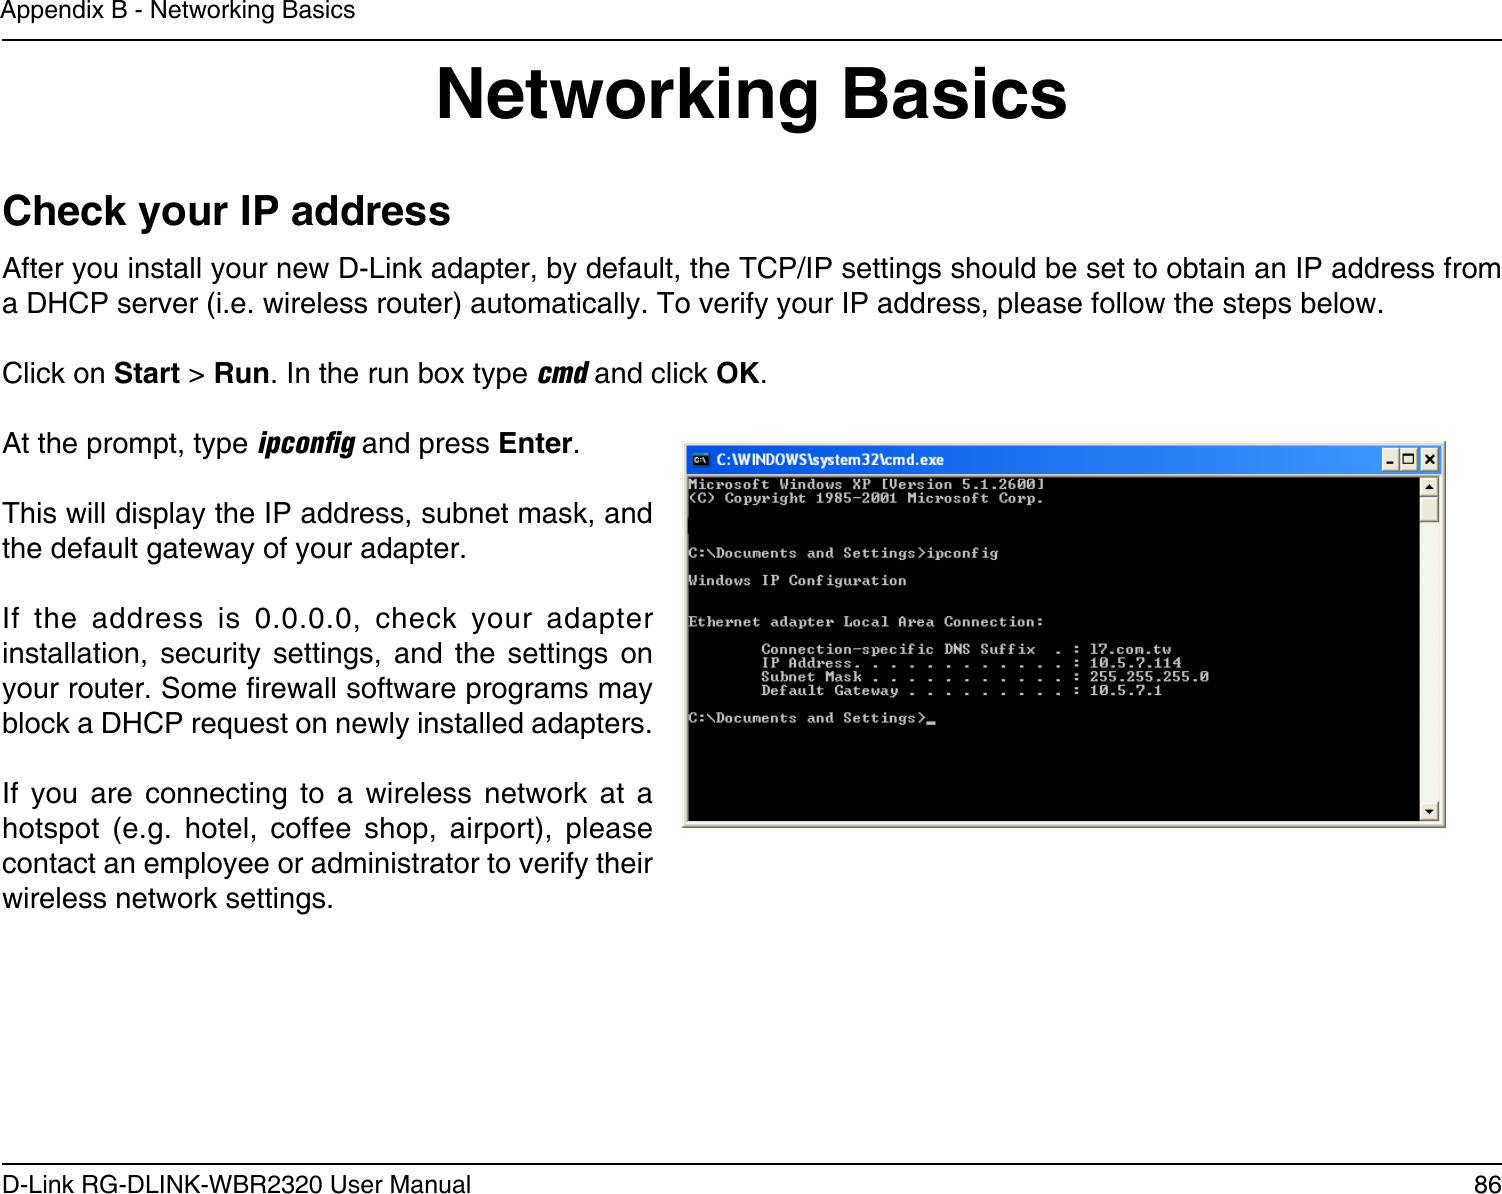 86D-Link RG-DLINK-WBR2320 User ManualAppendix B - Networking BasicsNetworking BasicsCheck your IP addressAfter you install your new D-Link adapter, by default, the TCP/IP settings should be set to obtain an IP address from a DHCP server (i.e. wireless router) automatically. To verify your IP address, please follow the steps below.Click on Start &gt; Run. In the run box type cmd and click OK.At the prompt, type ipconﬁg and press Enter.This will display the IP address, subnet mask, and the default gateway of your adapter.If  the  address  is  0.0.0.0,  check  your  adapter installation,  security  settings,  and  the  settings  on your router. Some rewall software programs may block a DHCP request on newly installed adapters. If  you  are  connecting  to  a  wireless  network  at  a hotspot  (e.g.  hotel,  coffee  shop,  airport),  please contact an employee or administrator to verify their wireless network settings.